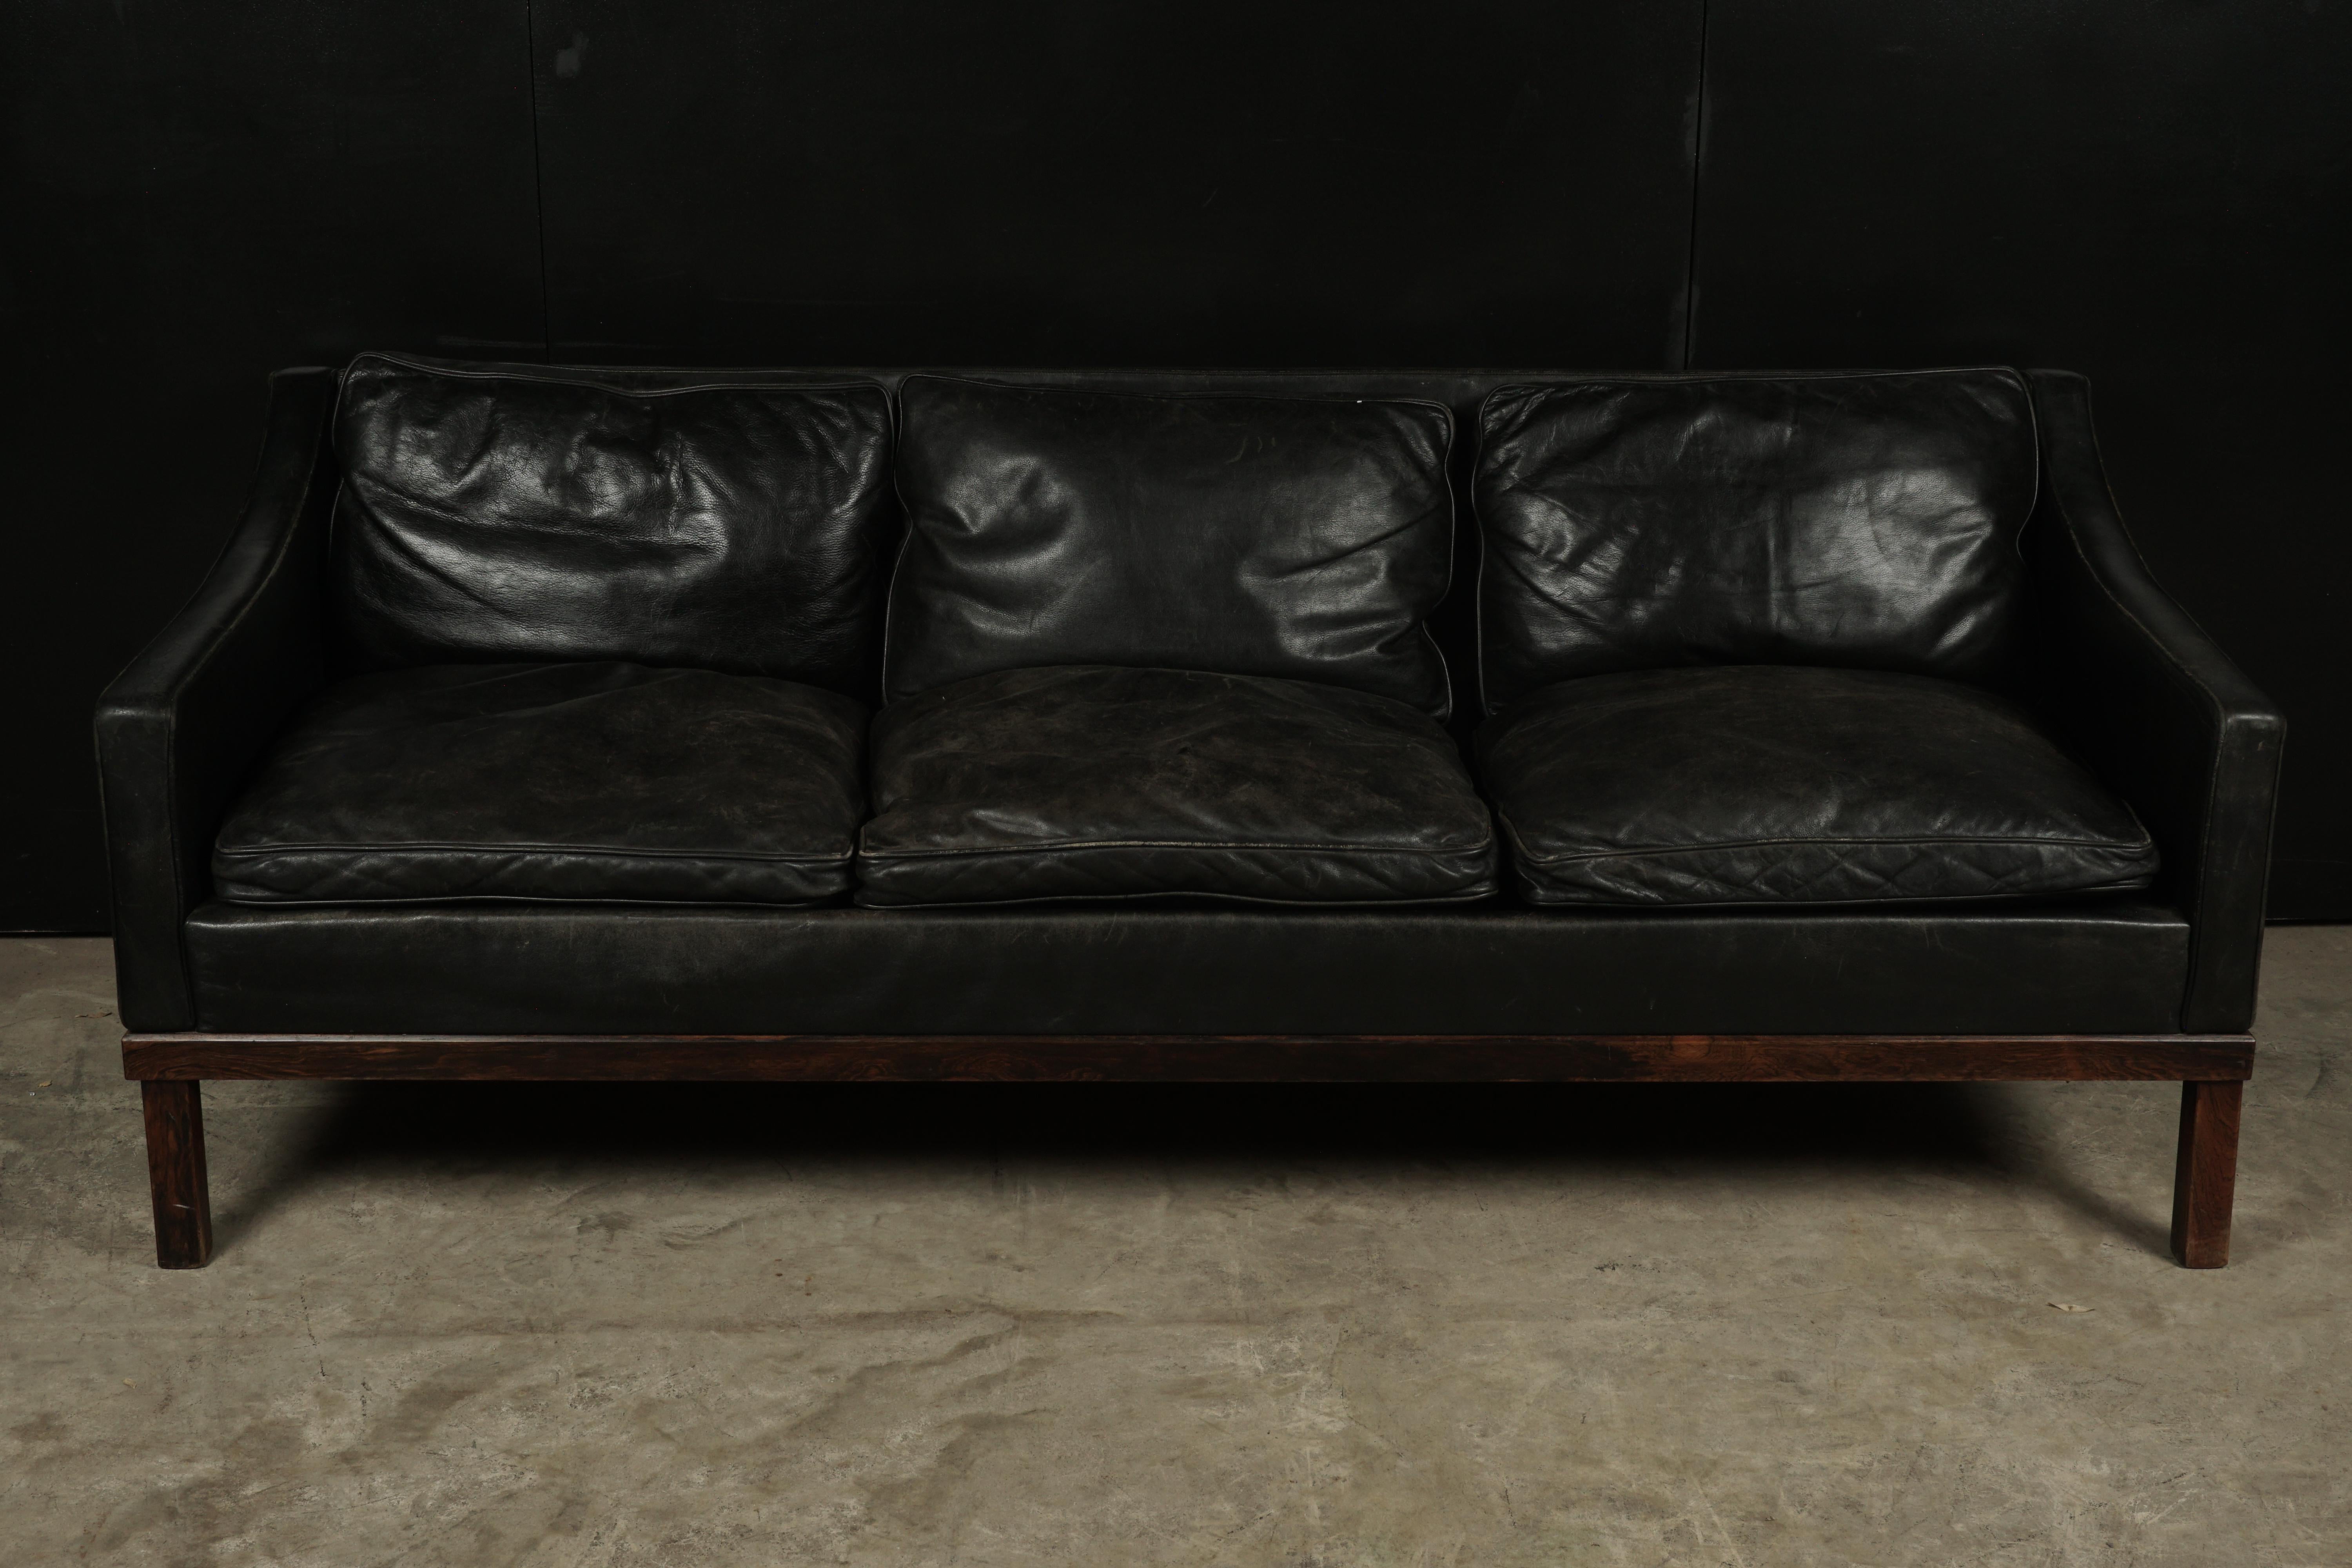 Midcentury sofa manufactured by OPE, Sweden, circa 1970. Original black leather upholstery with great patina.